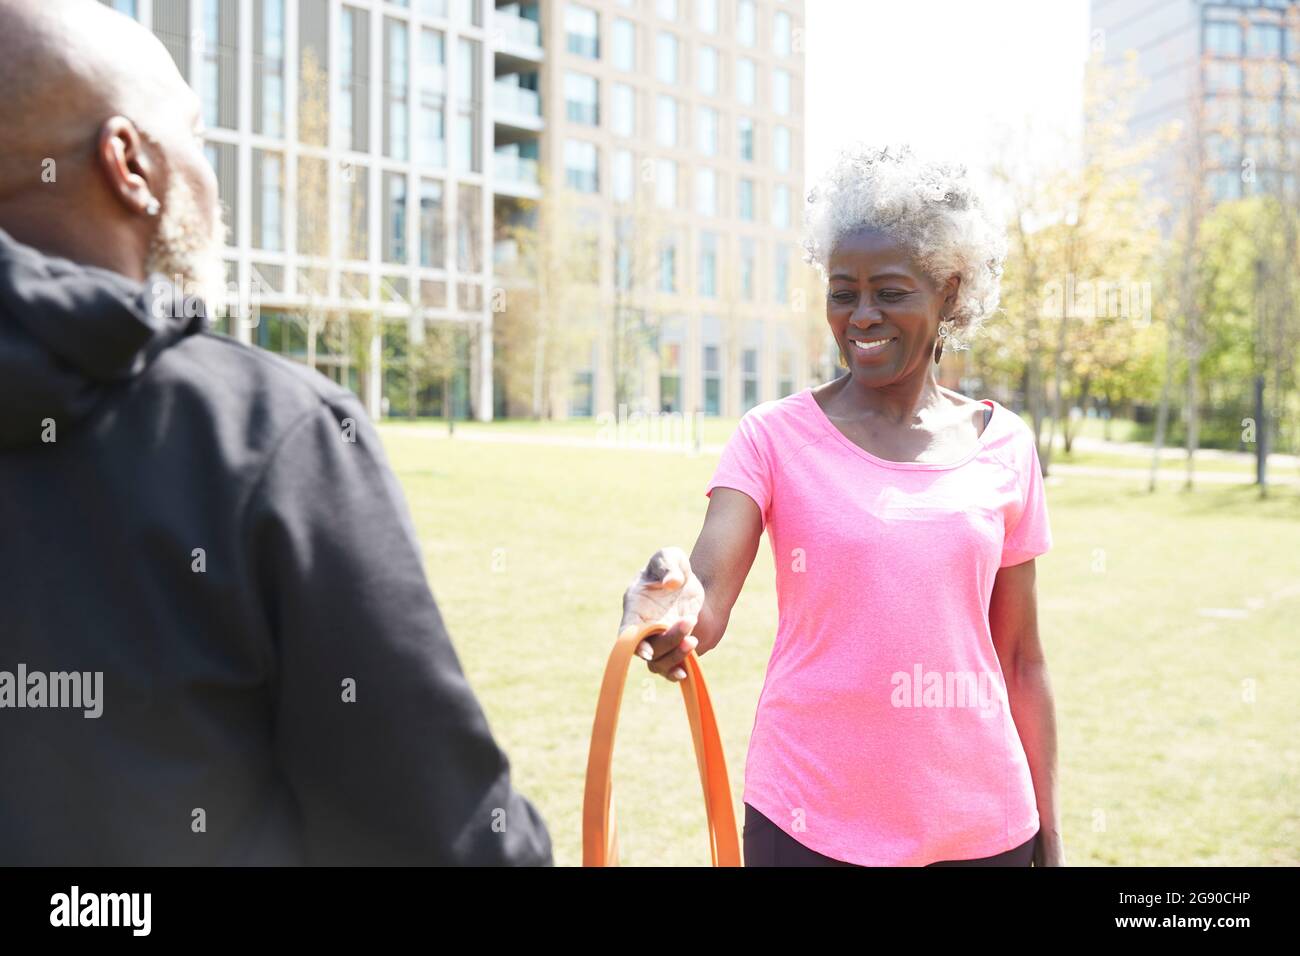 Smiling woman giving resistance band to man at park Stock Photo